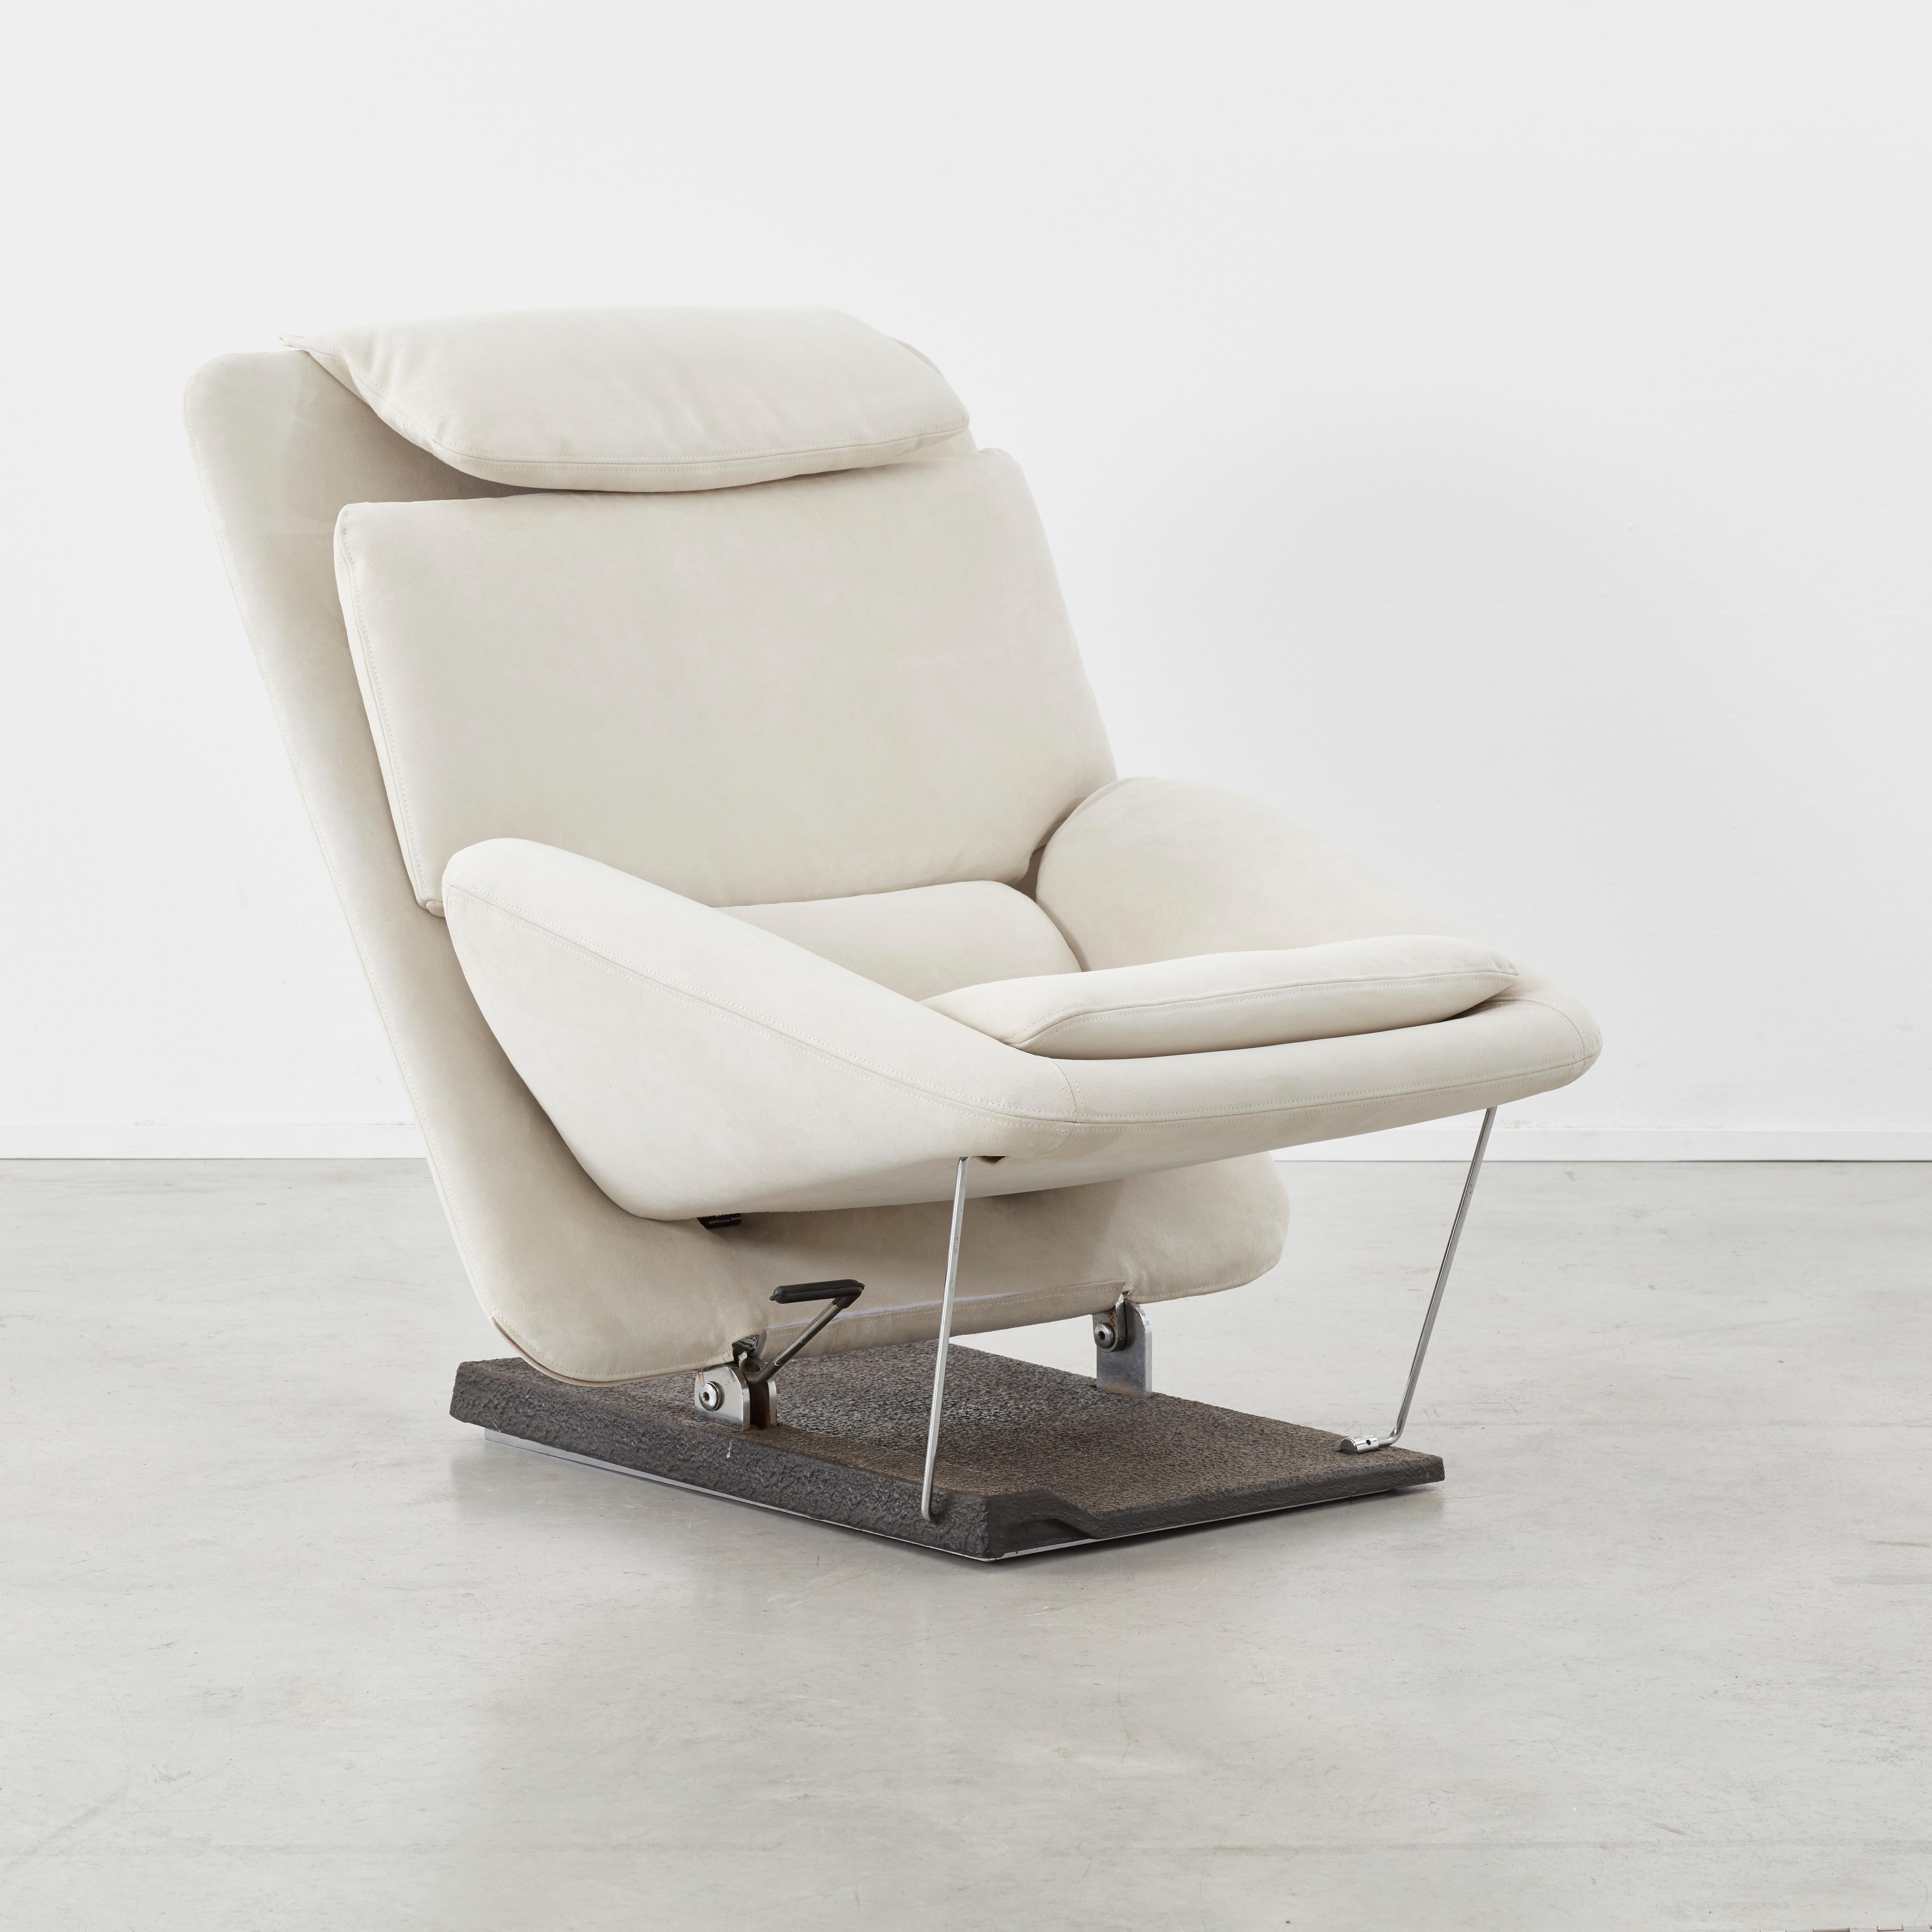 This stunning lounge chair will probably be the most comfortable thing you have ever sat in. The chair’s rectangular body looks minimal and clean from the back whilst there is a slight hint of a futurist aesthetic from the front. The seat element is